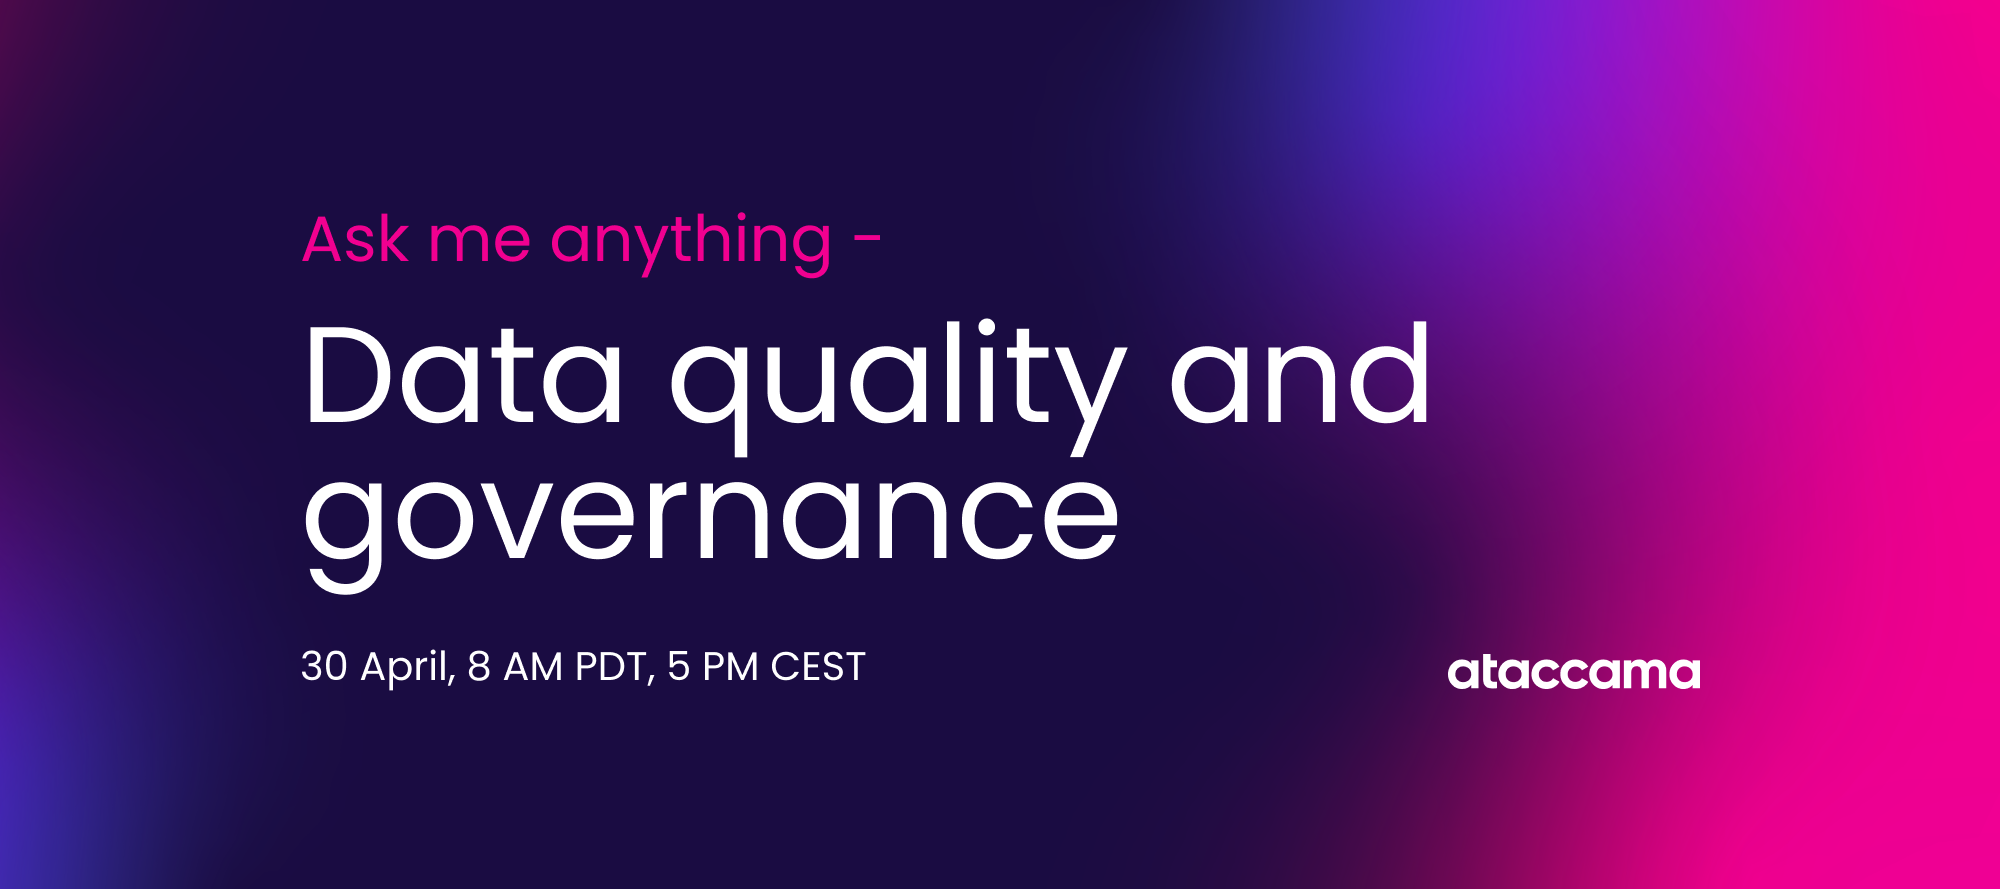 🎙️ Ask me anything: Data quality and governance webinar coming soon 🎙️